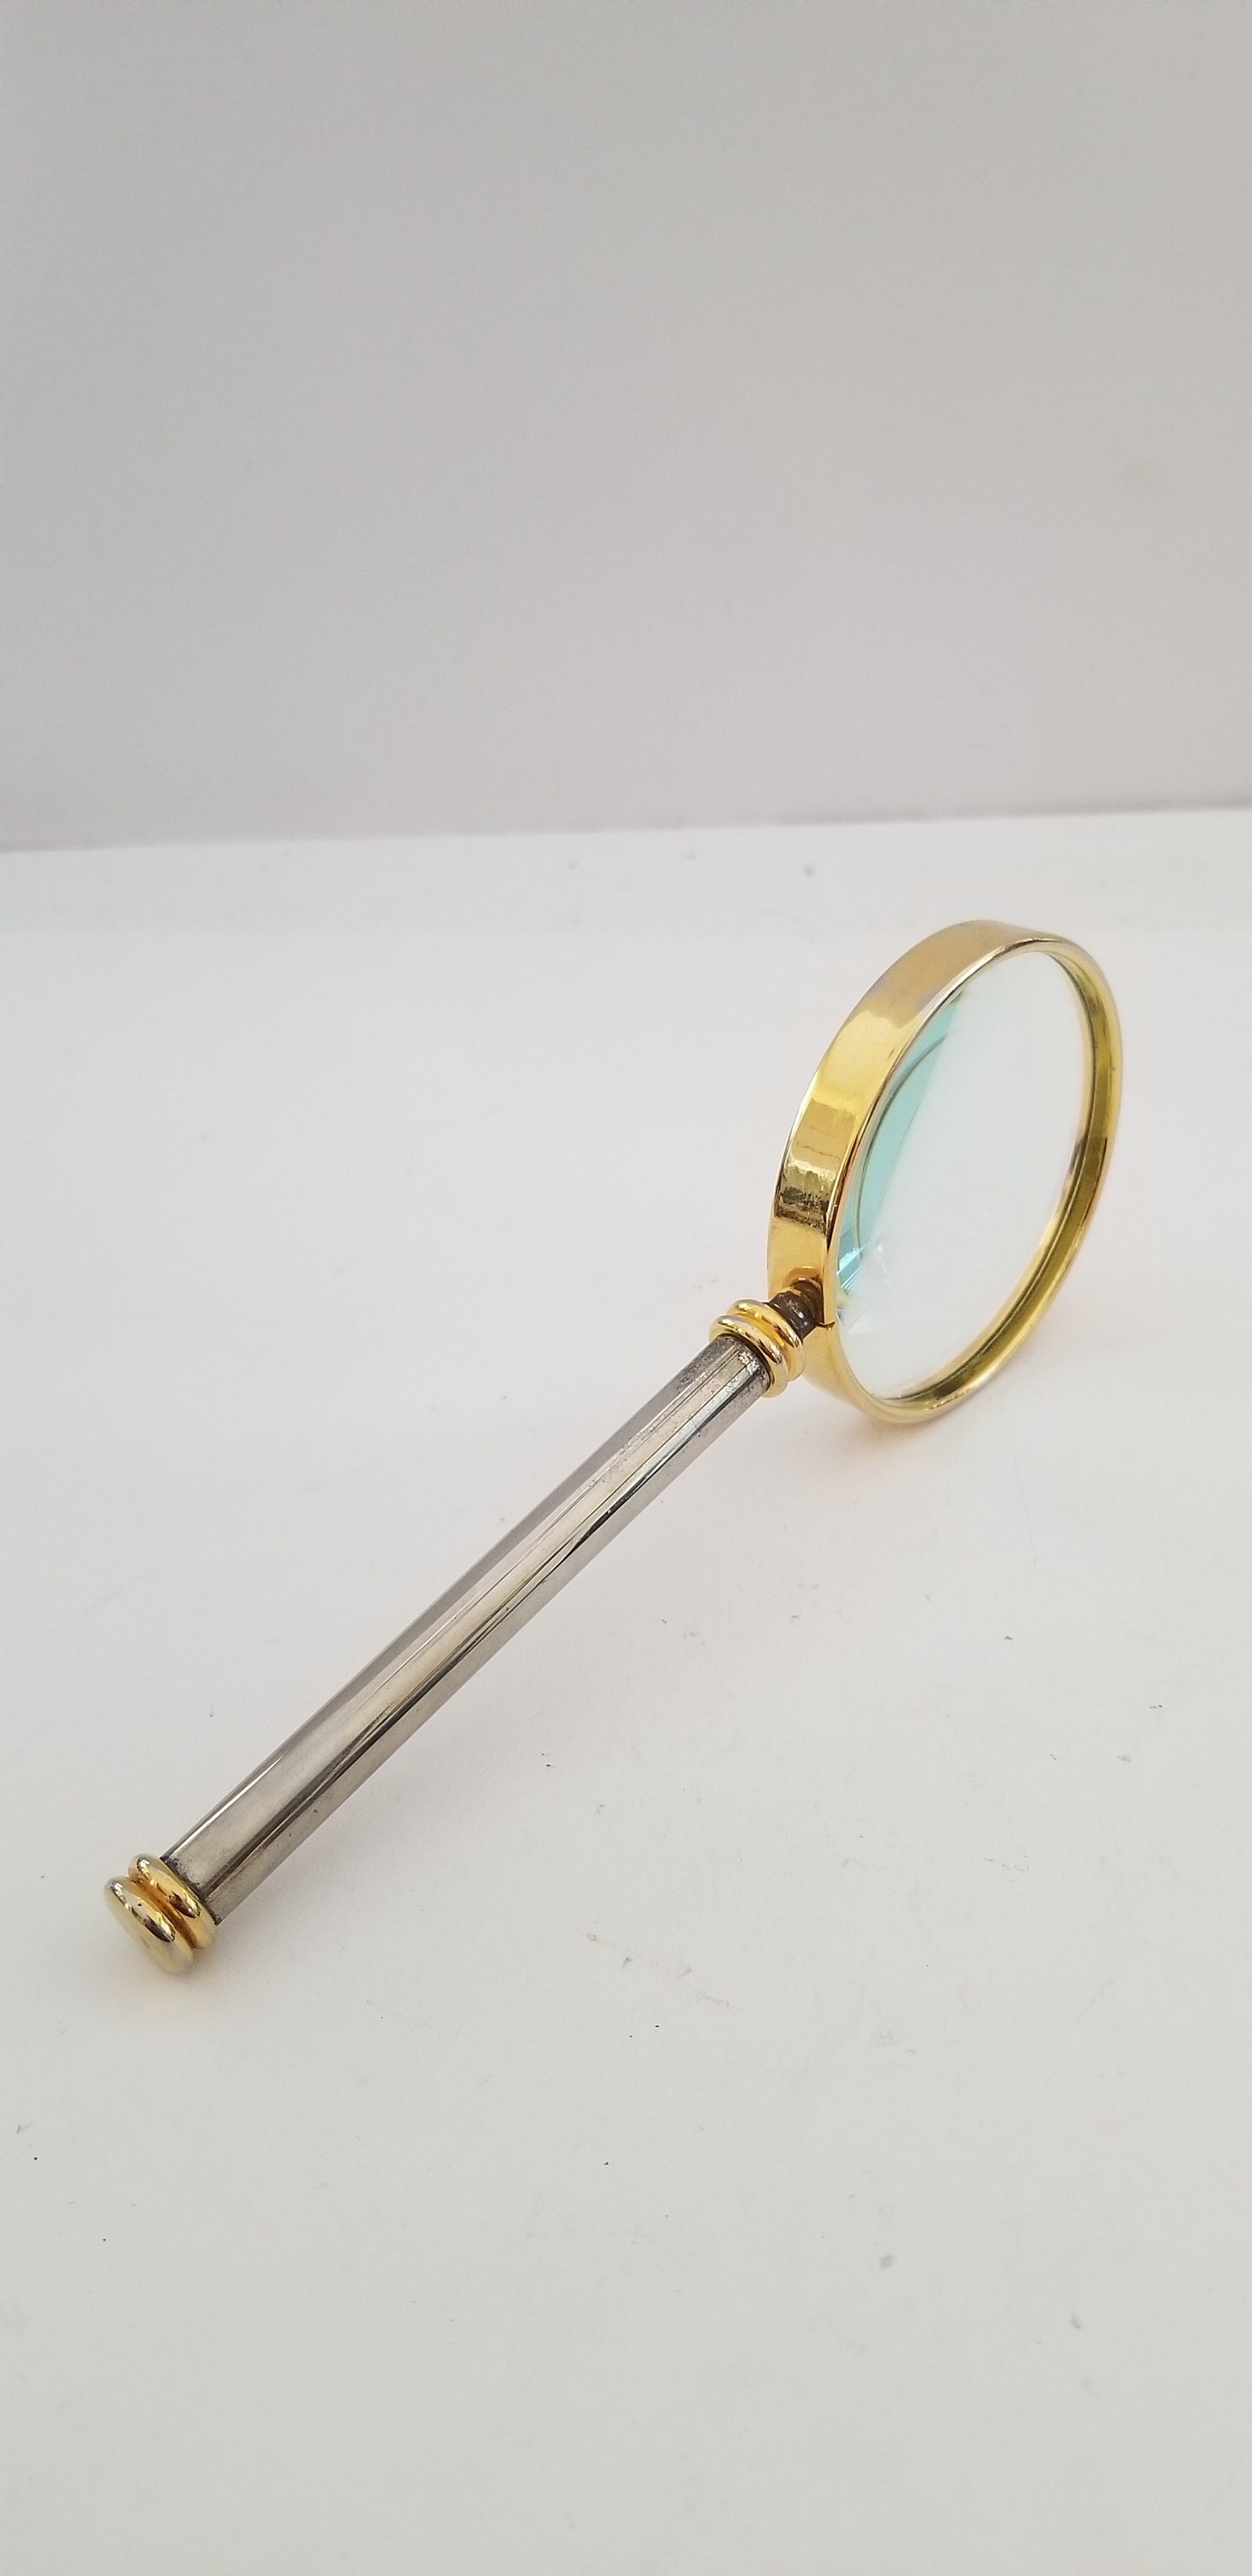 The Classic Magnifying Glass 3 with Powerful 5X Magnification - Metal Frame